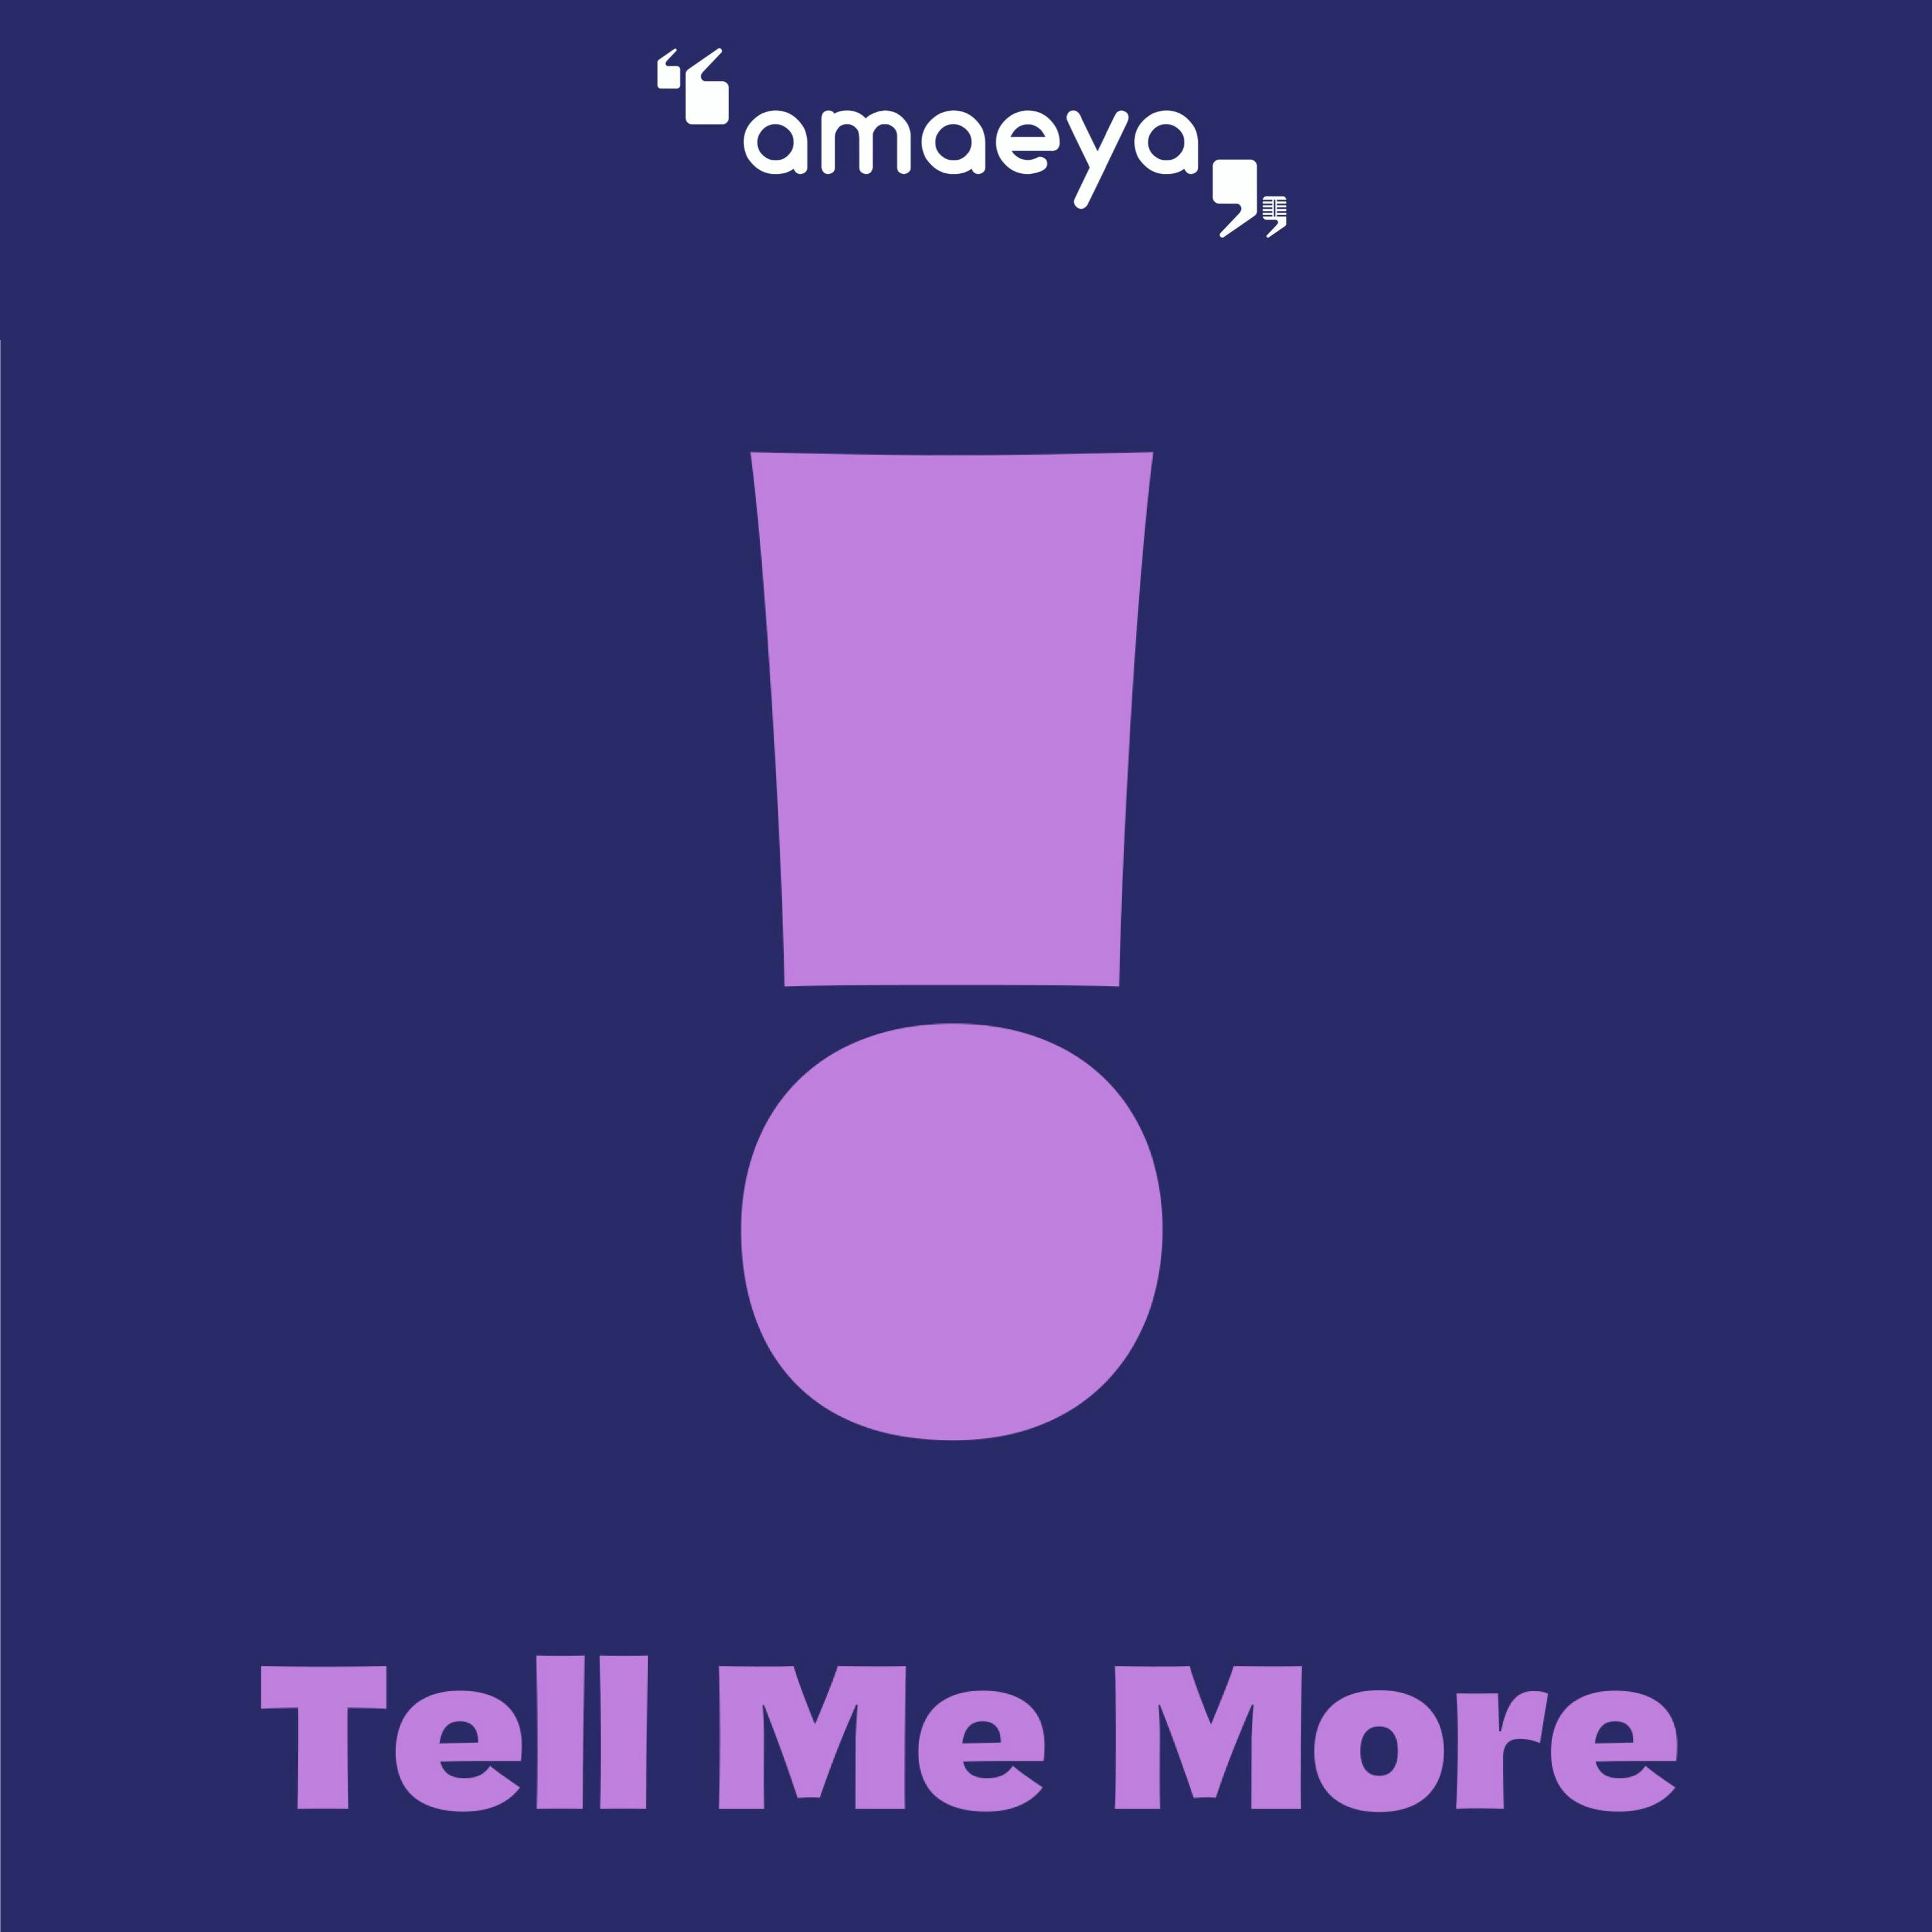 Introducing: Tell me more!